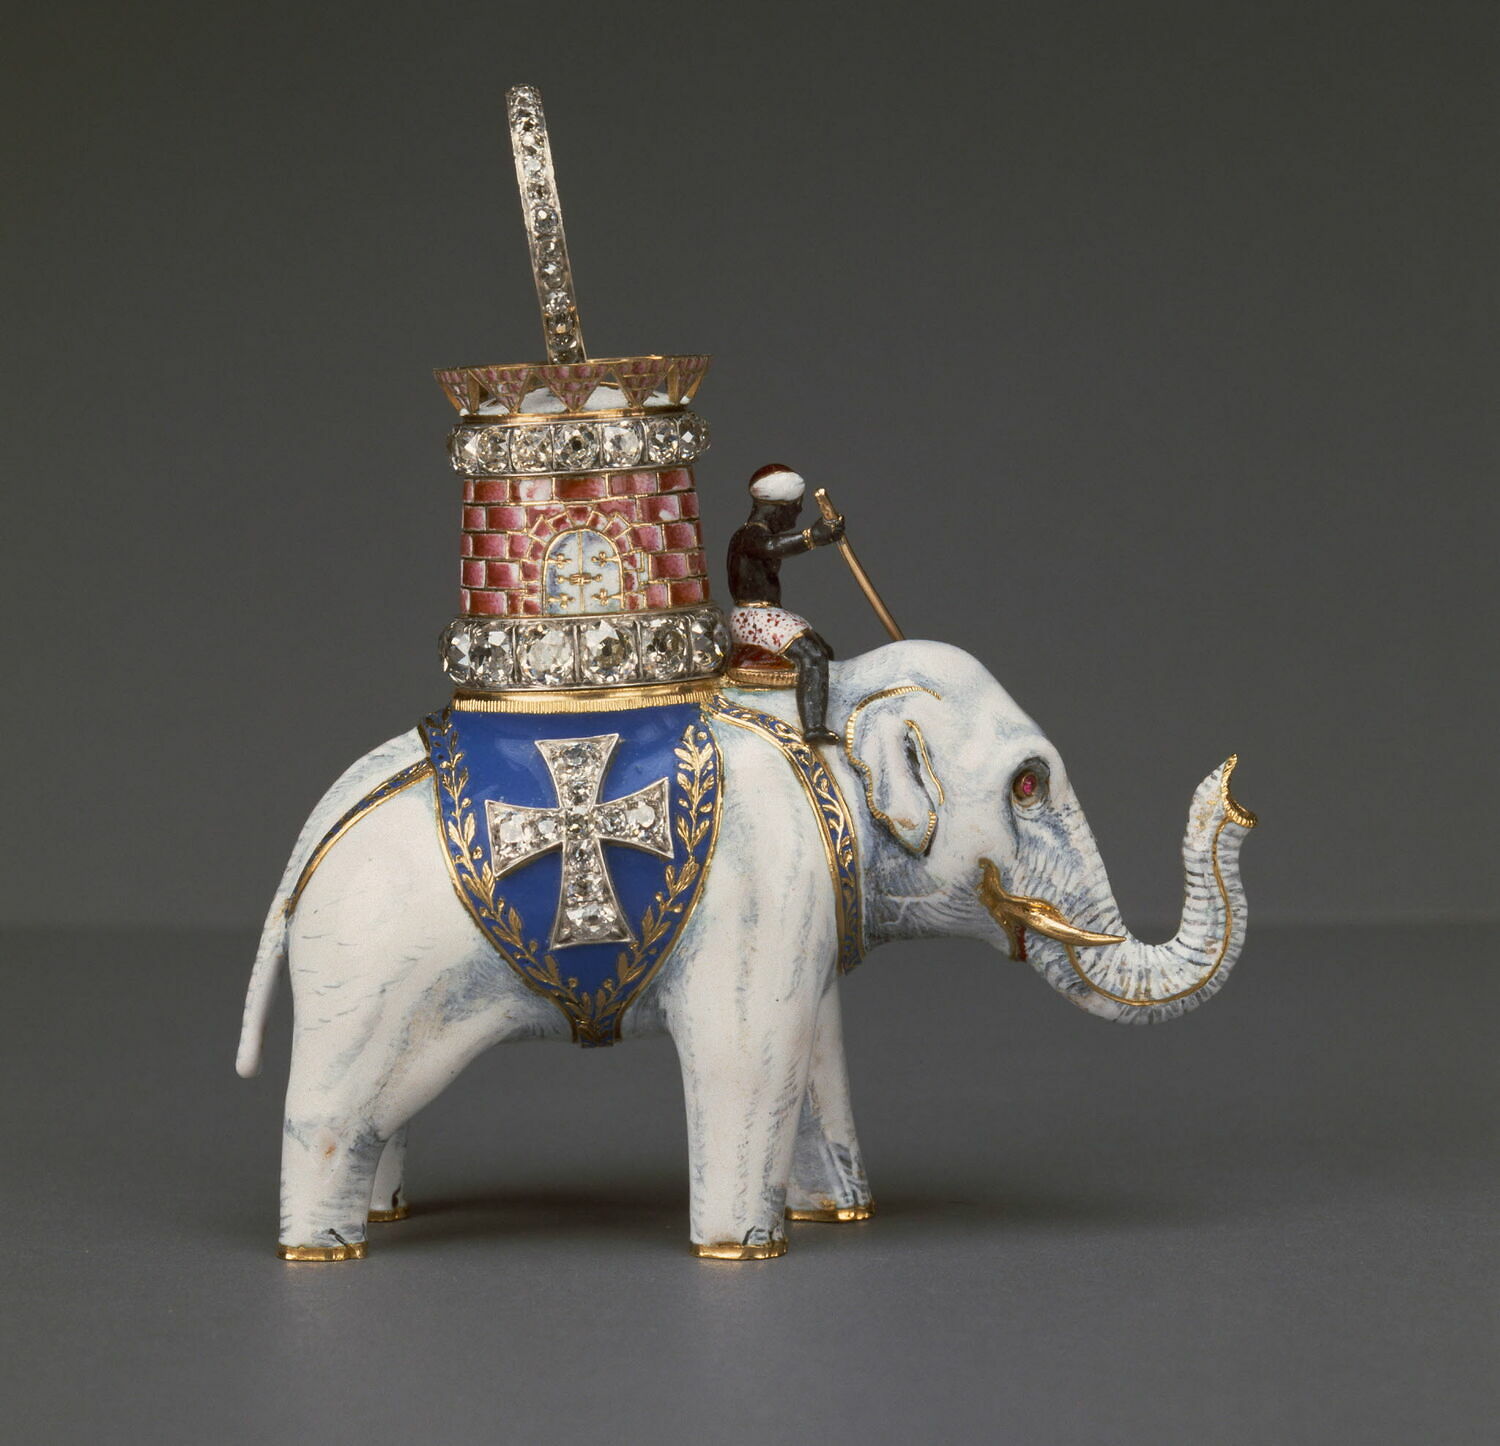 Louis XVIII Order of the Elephant from the Louvre collection.JPG